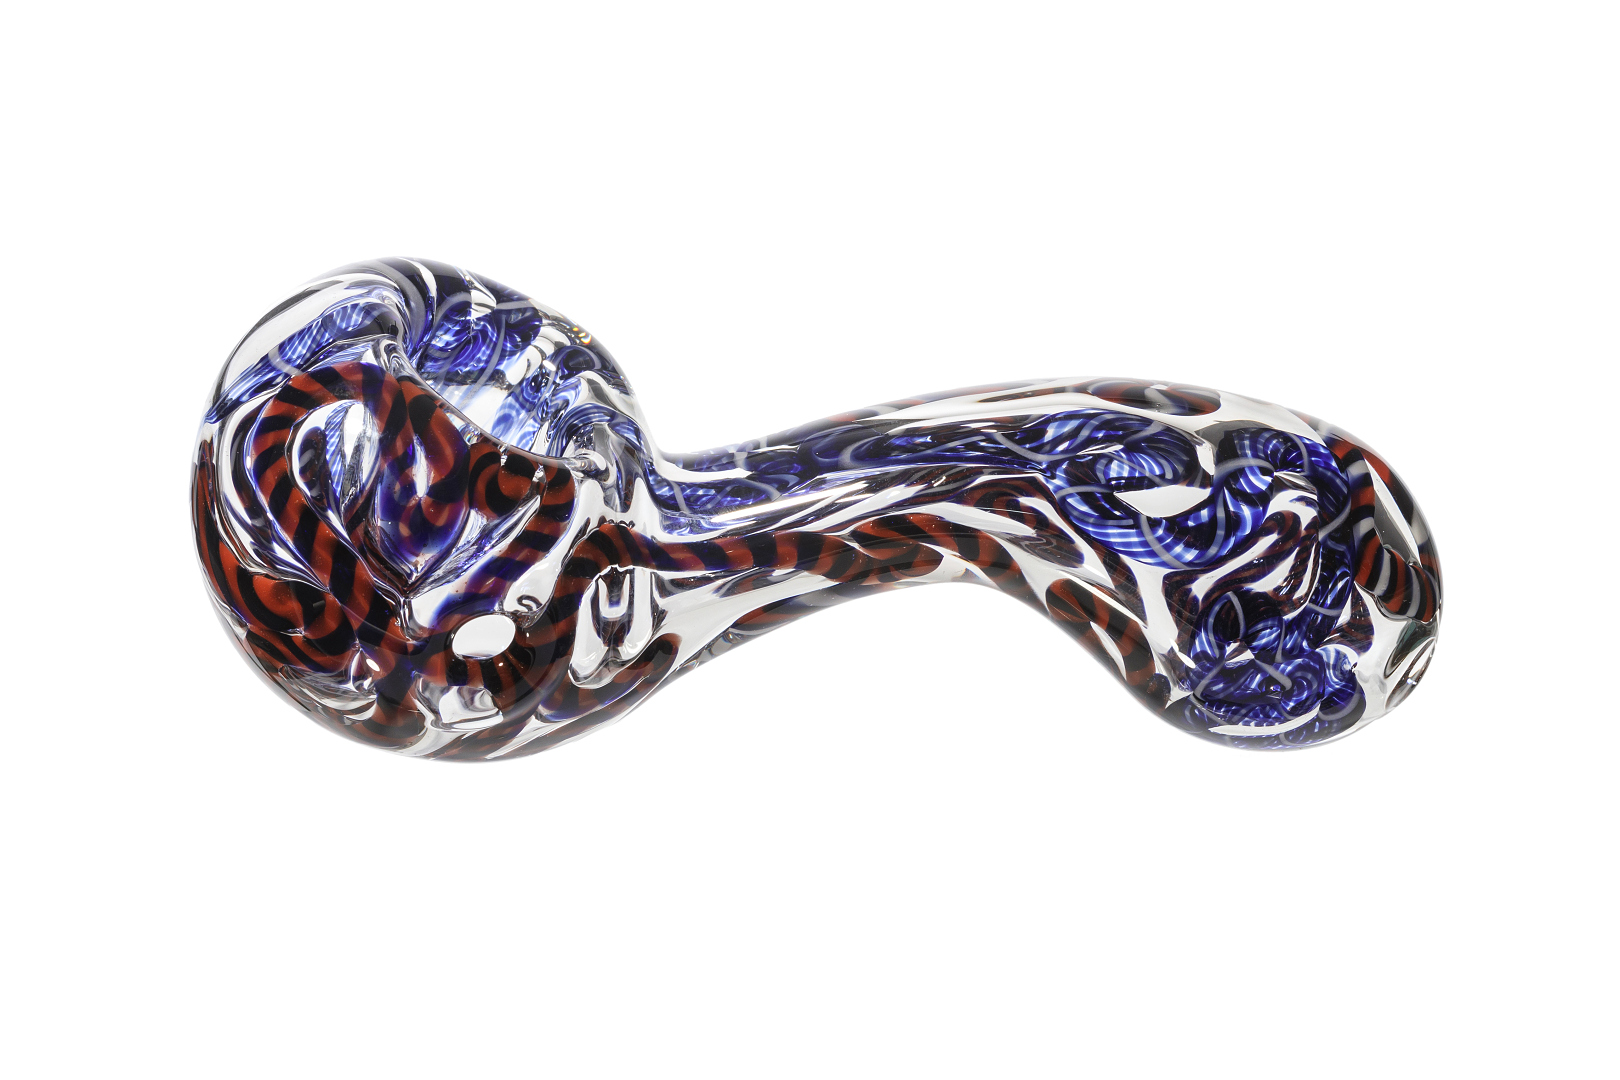 Details about   Handmade glass Pipe tobacco Smoking pipe By Bluejay Glass 